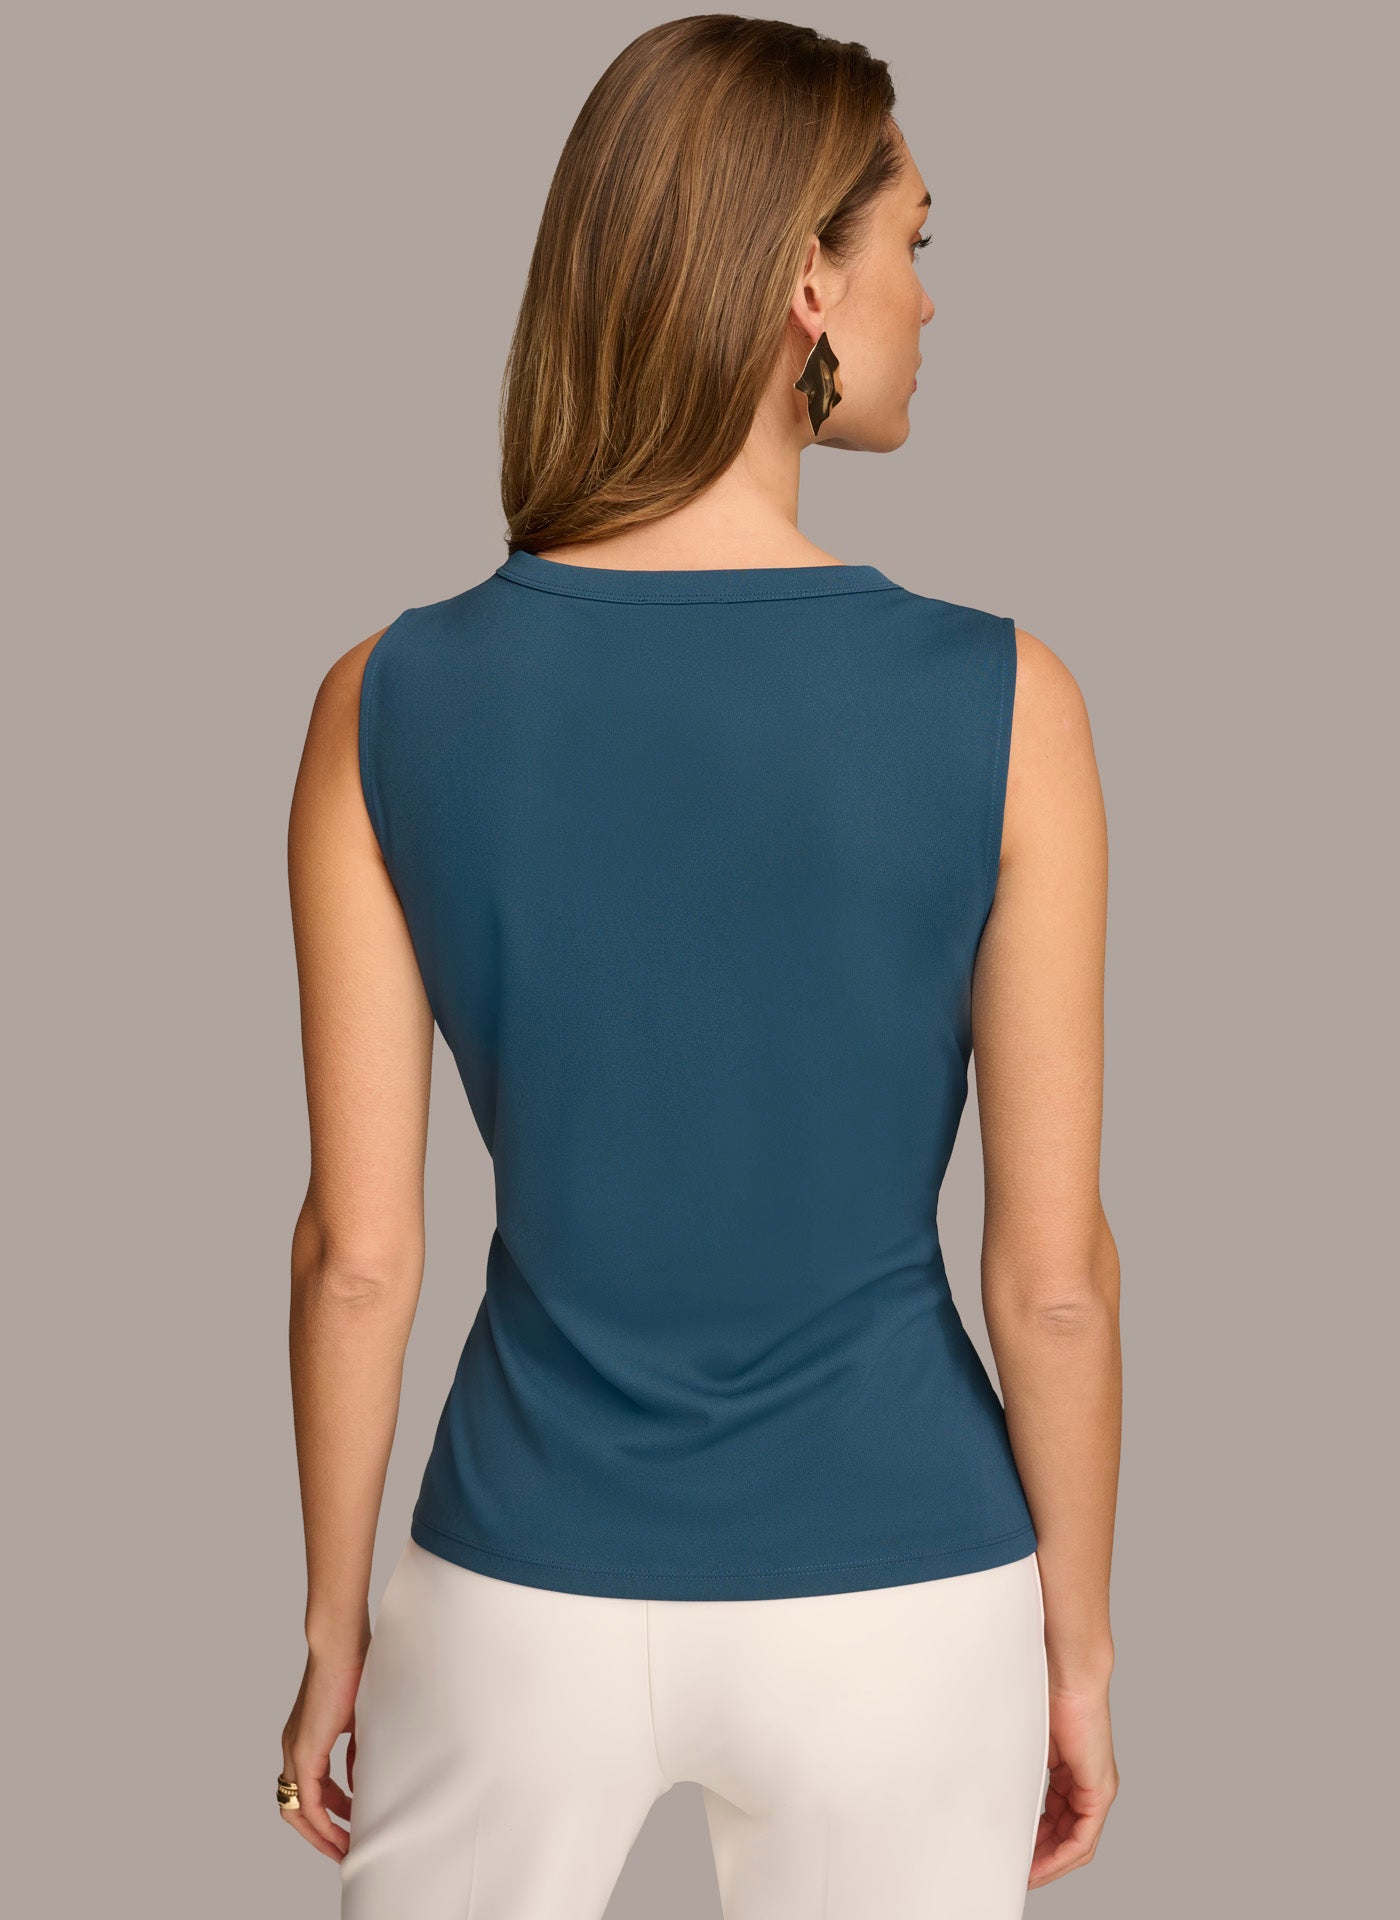 SLEEVELESS KNIT TOP WITH BUTTON DETAIL